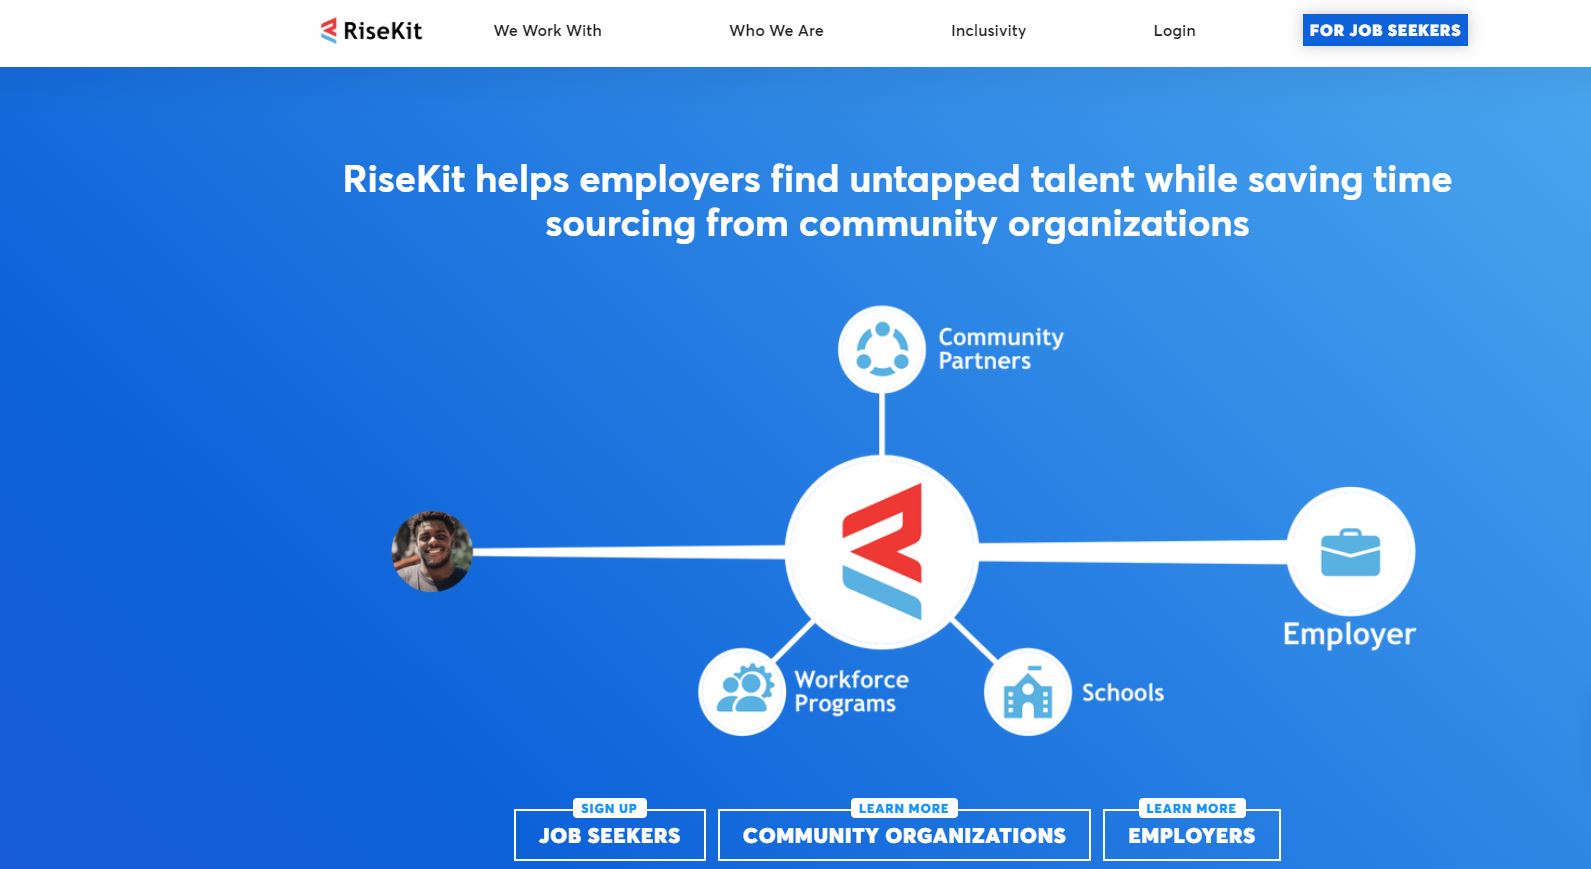 RiseKit is a Chicago-based startup and has raised $4.75M from investors